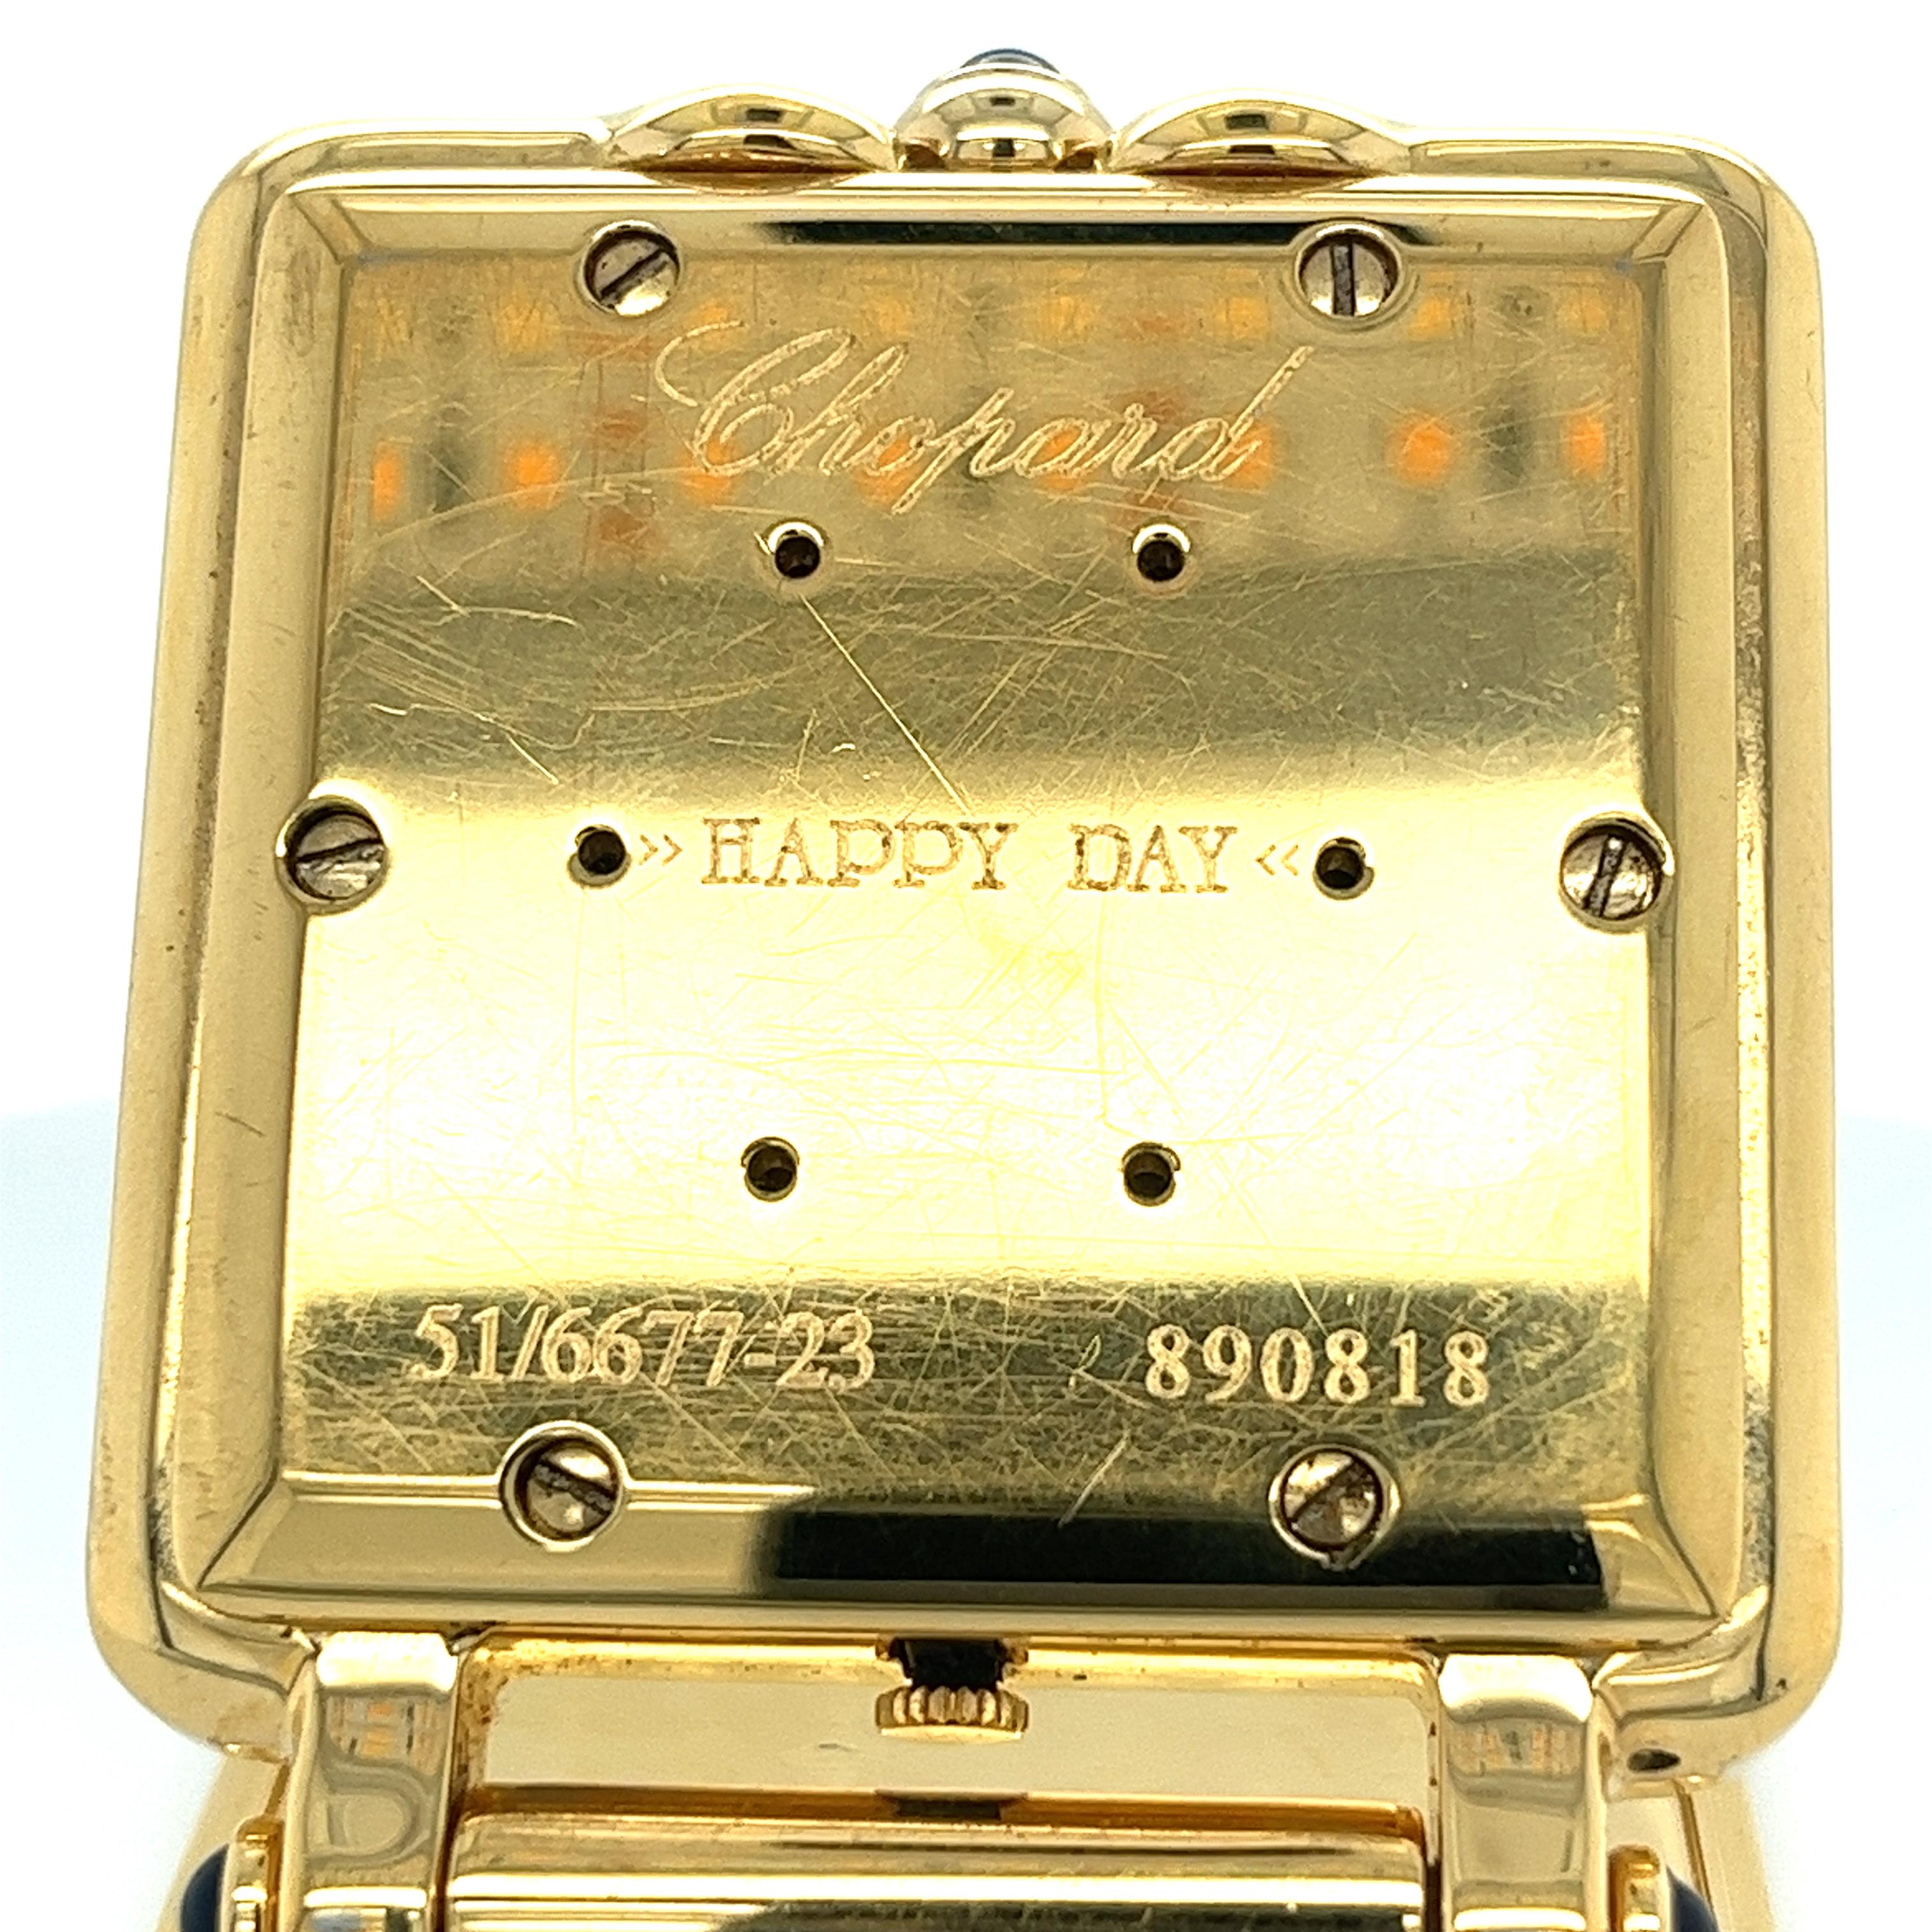 Women's or Men's Chopard Happy Day Traveling Pocket Watch And Clock 51/6677-23 - 890818